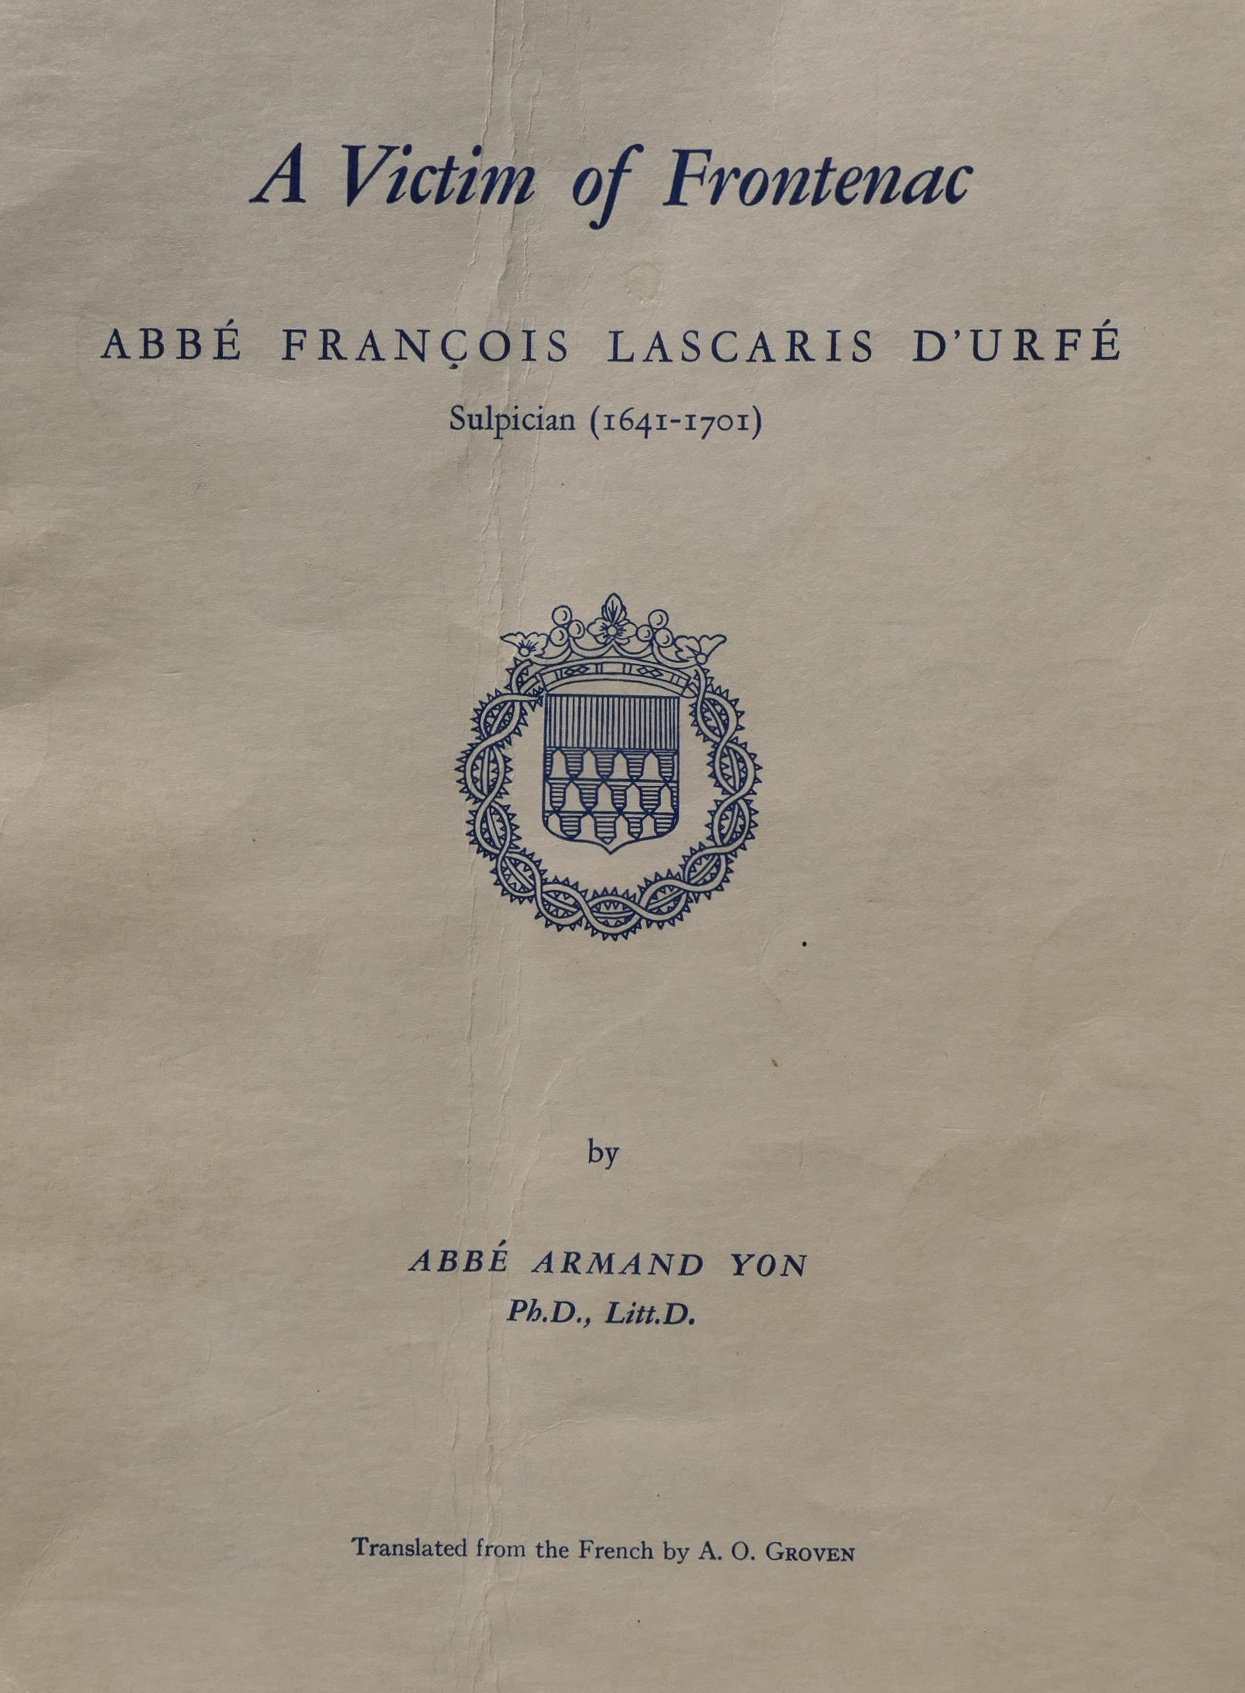 cover page of 1959 doc